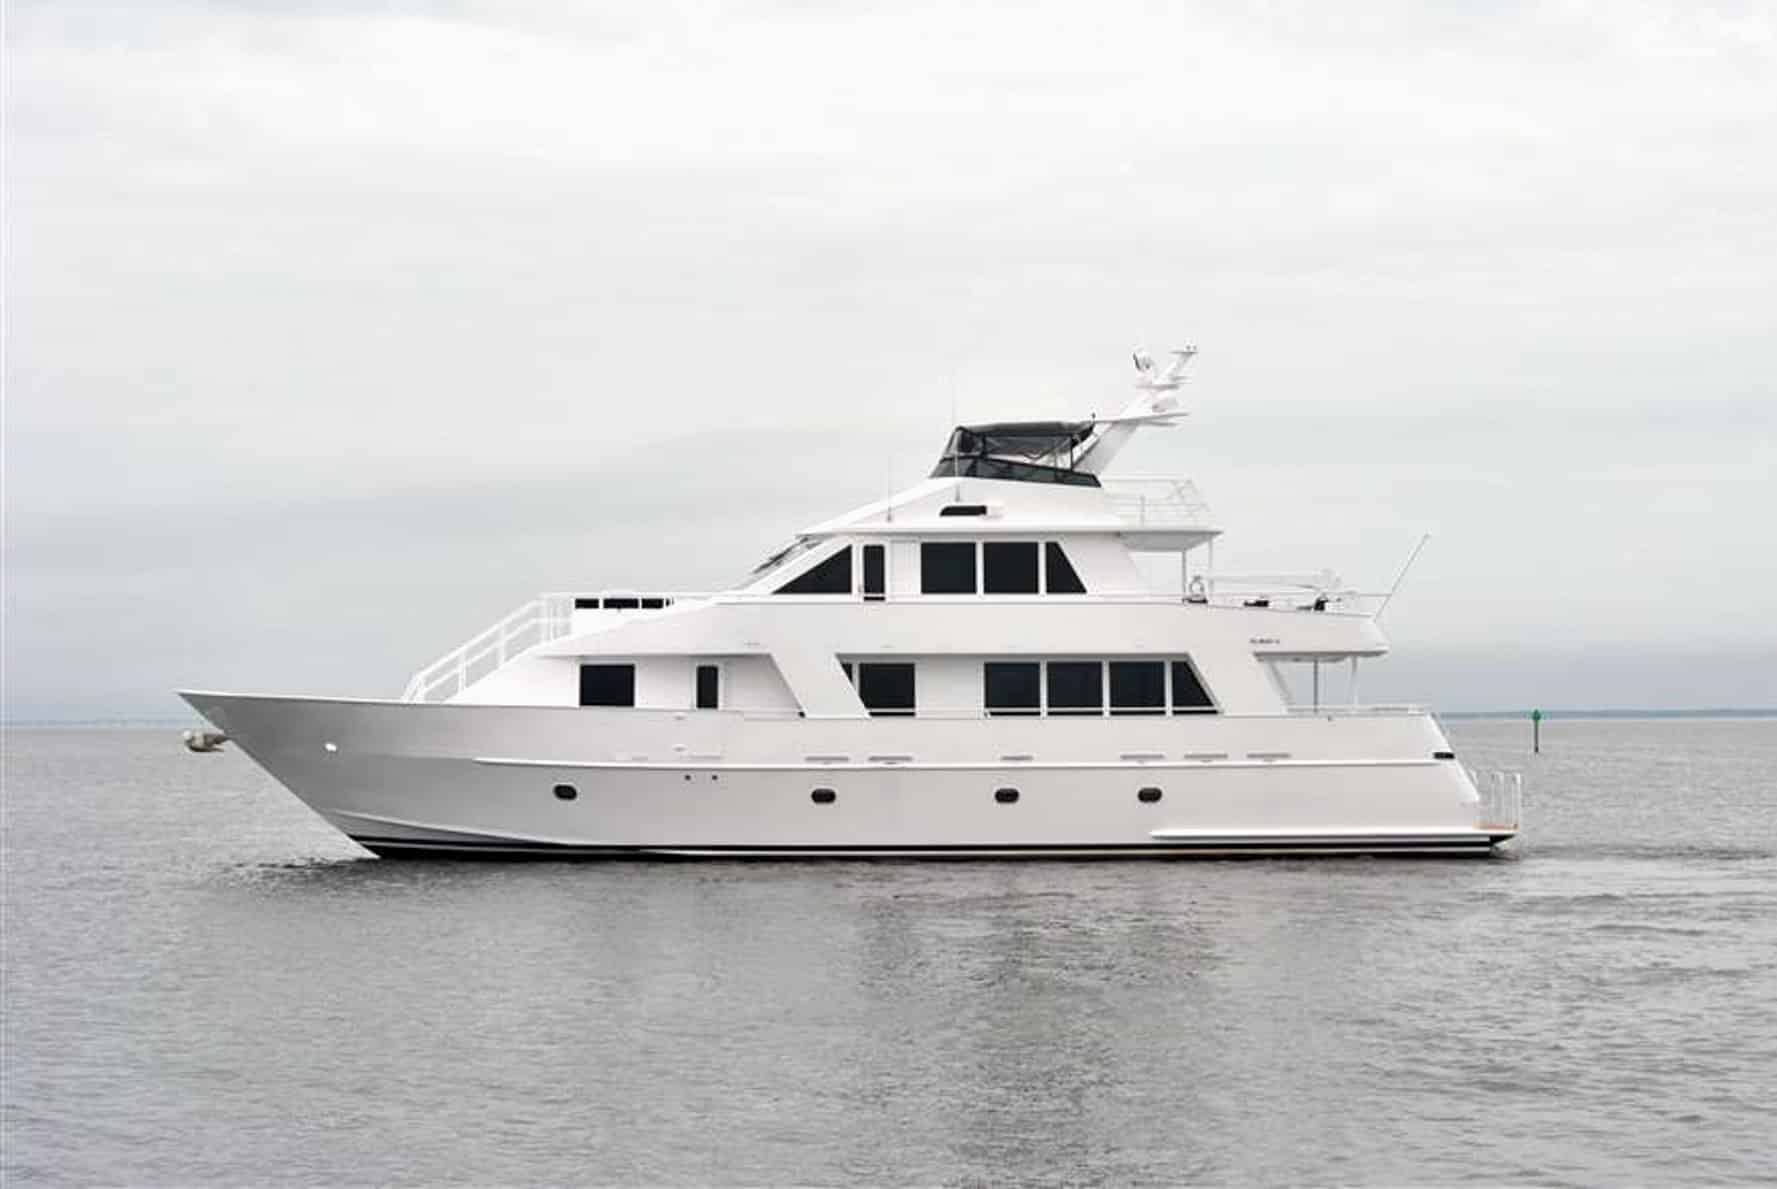 Jenny Lynne 87 Voyager - Luxury Yacht Profile Sailing in Water